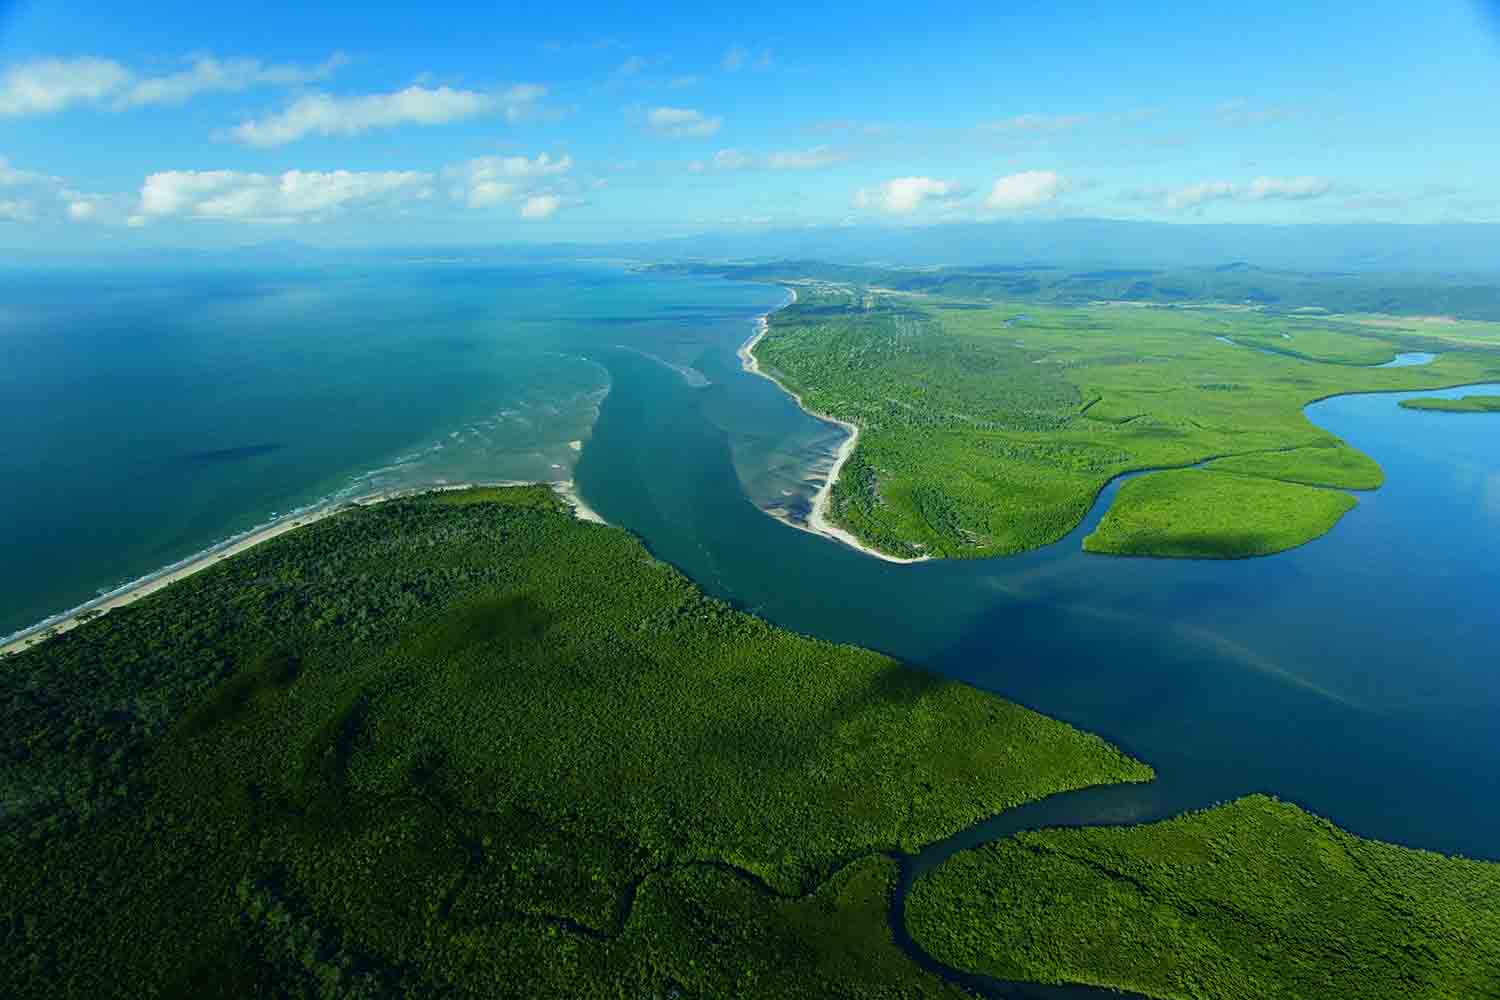 Aerial view of the Daintree river cutting through rainforest